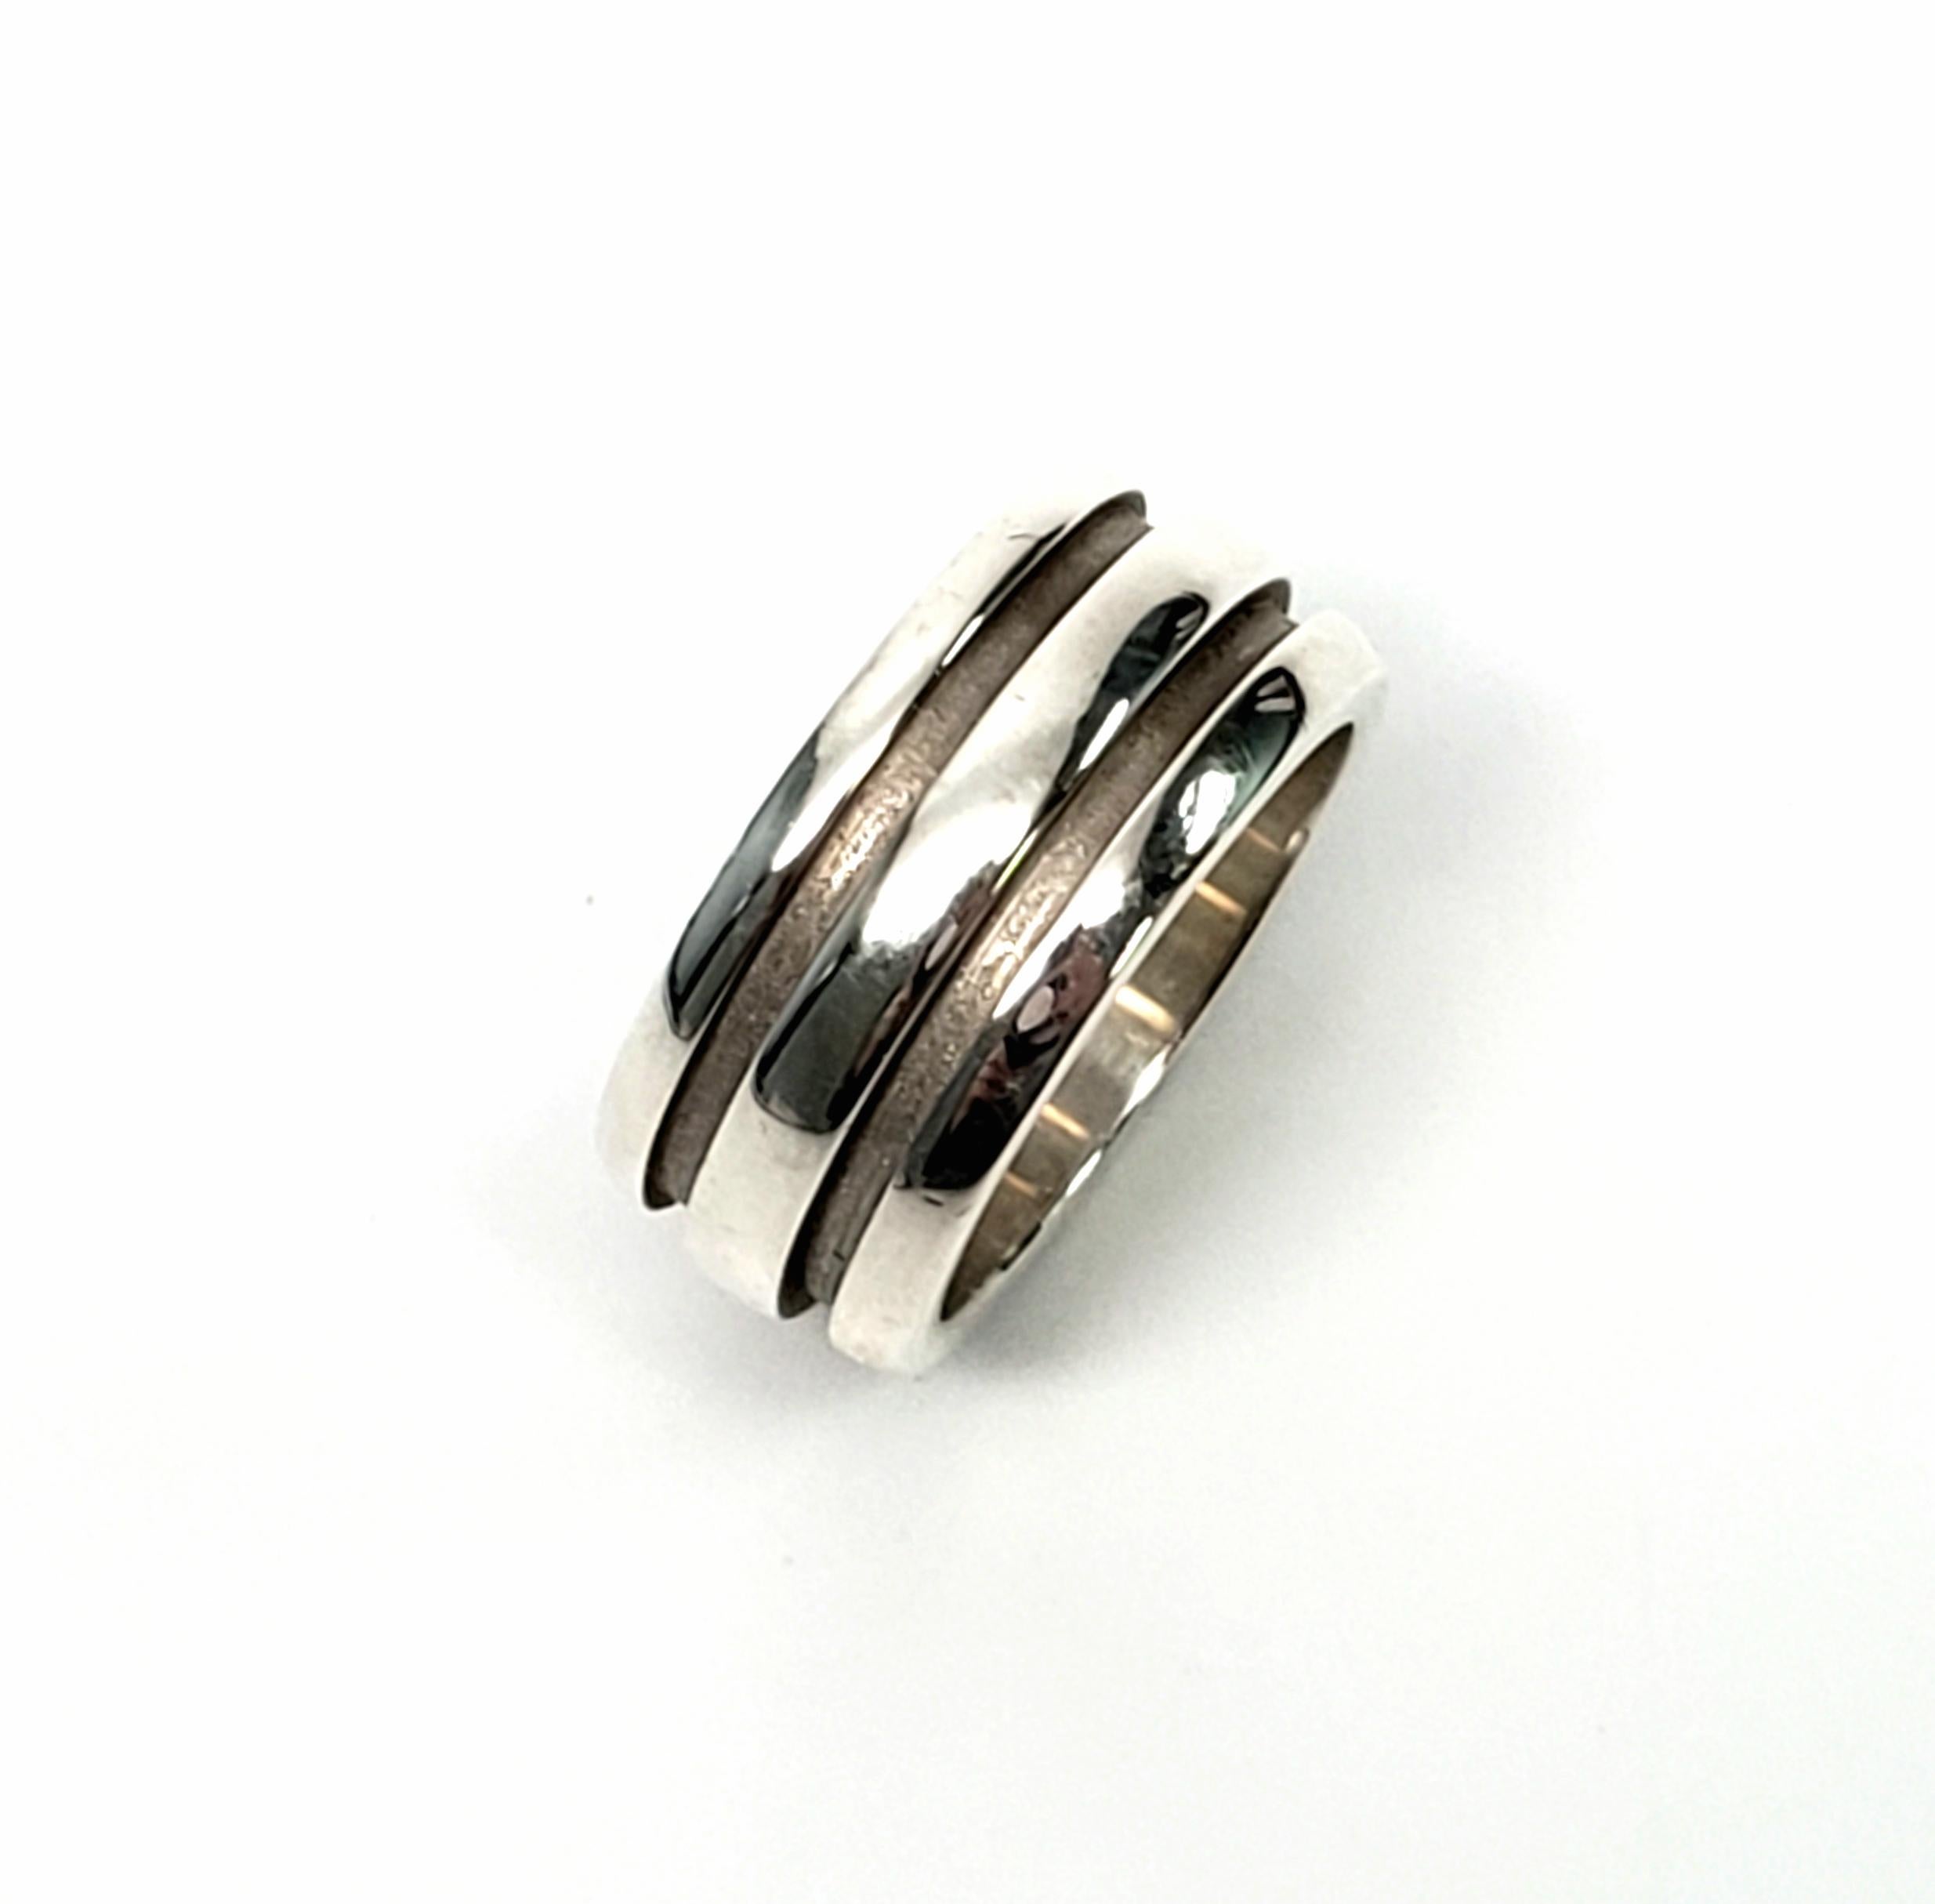 Vintage sterling silver ring by Tiffany & Co, circa 1995.

Sterling silver grooved or ribbed unisex band by Tiffany & Co.

Measures 9mm - 3/8